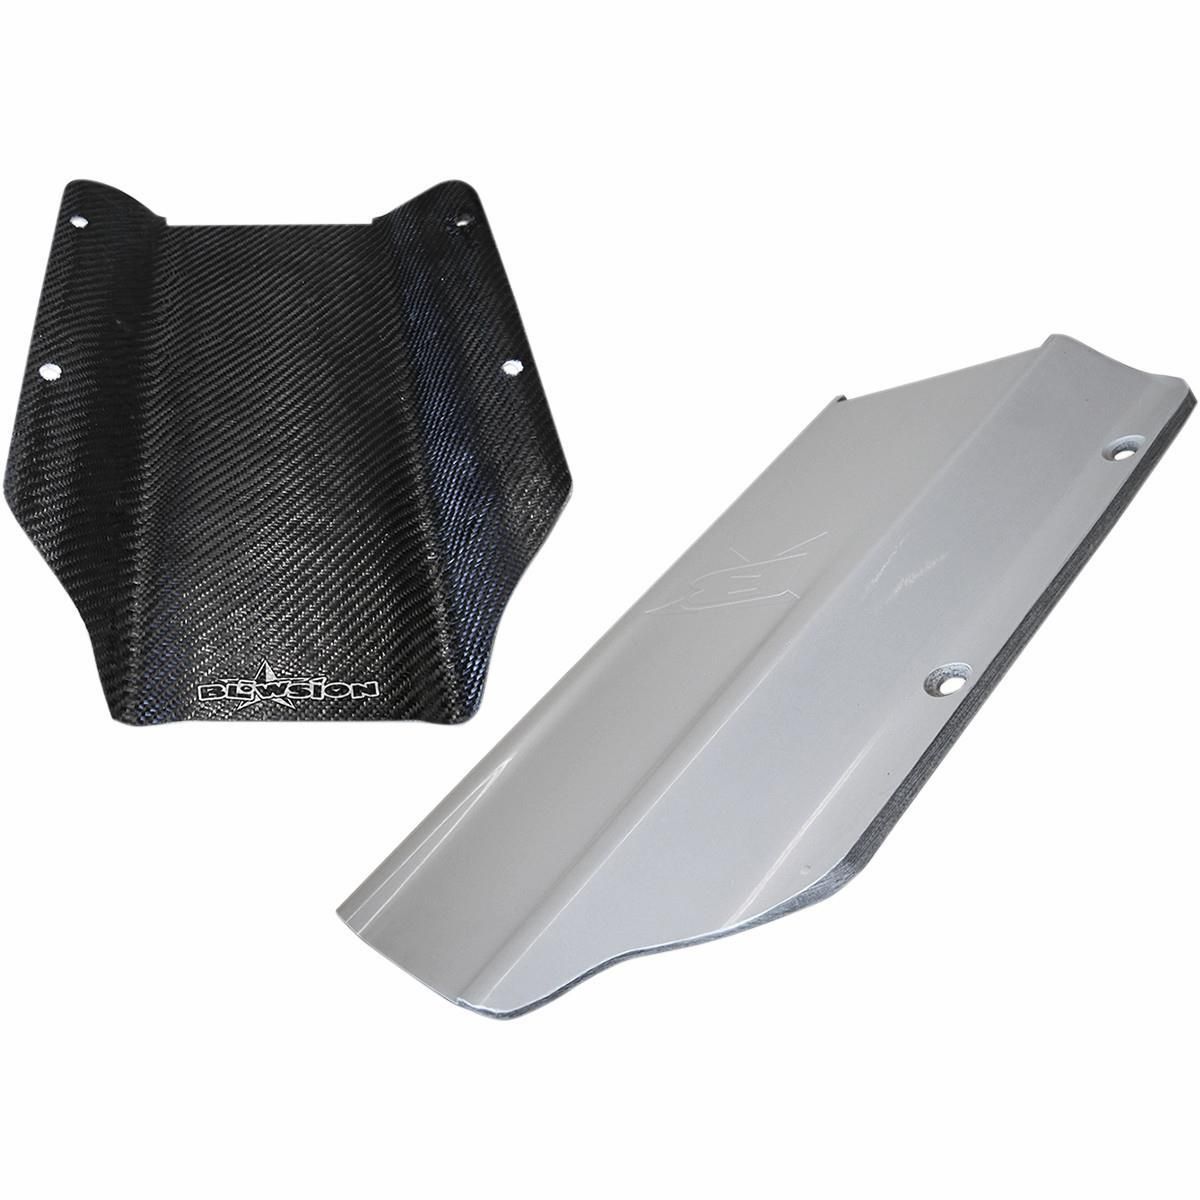 33AY-BLOWSION-02-01-209 Composite Ride Plate